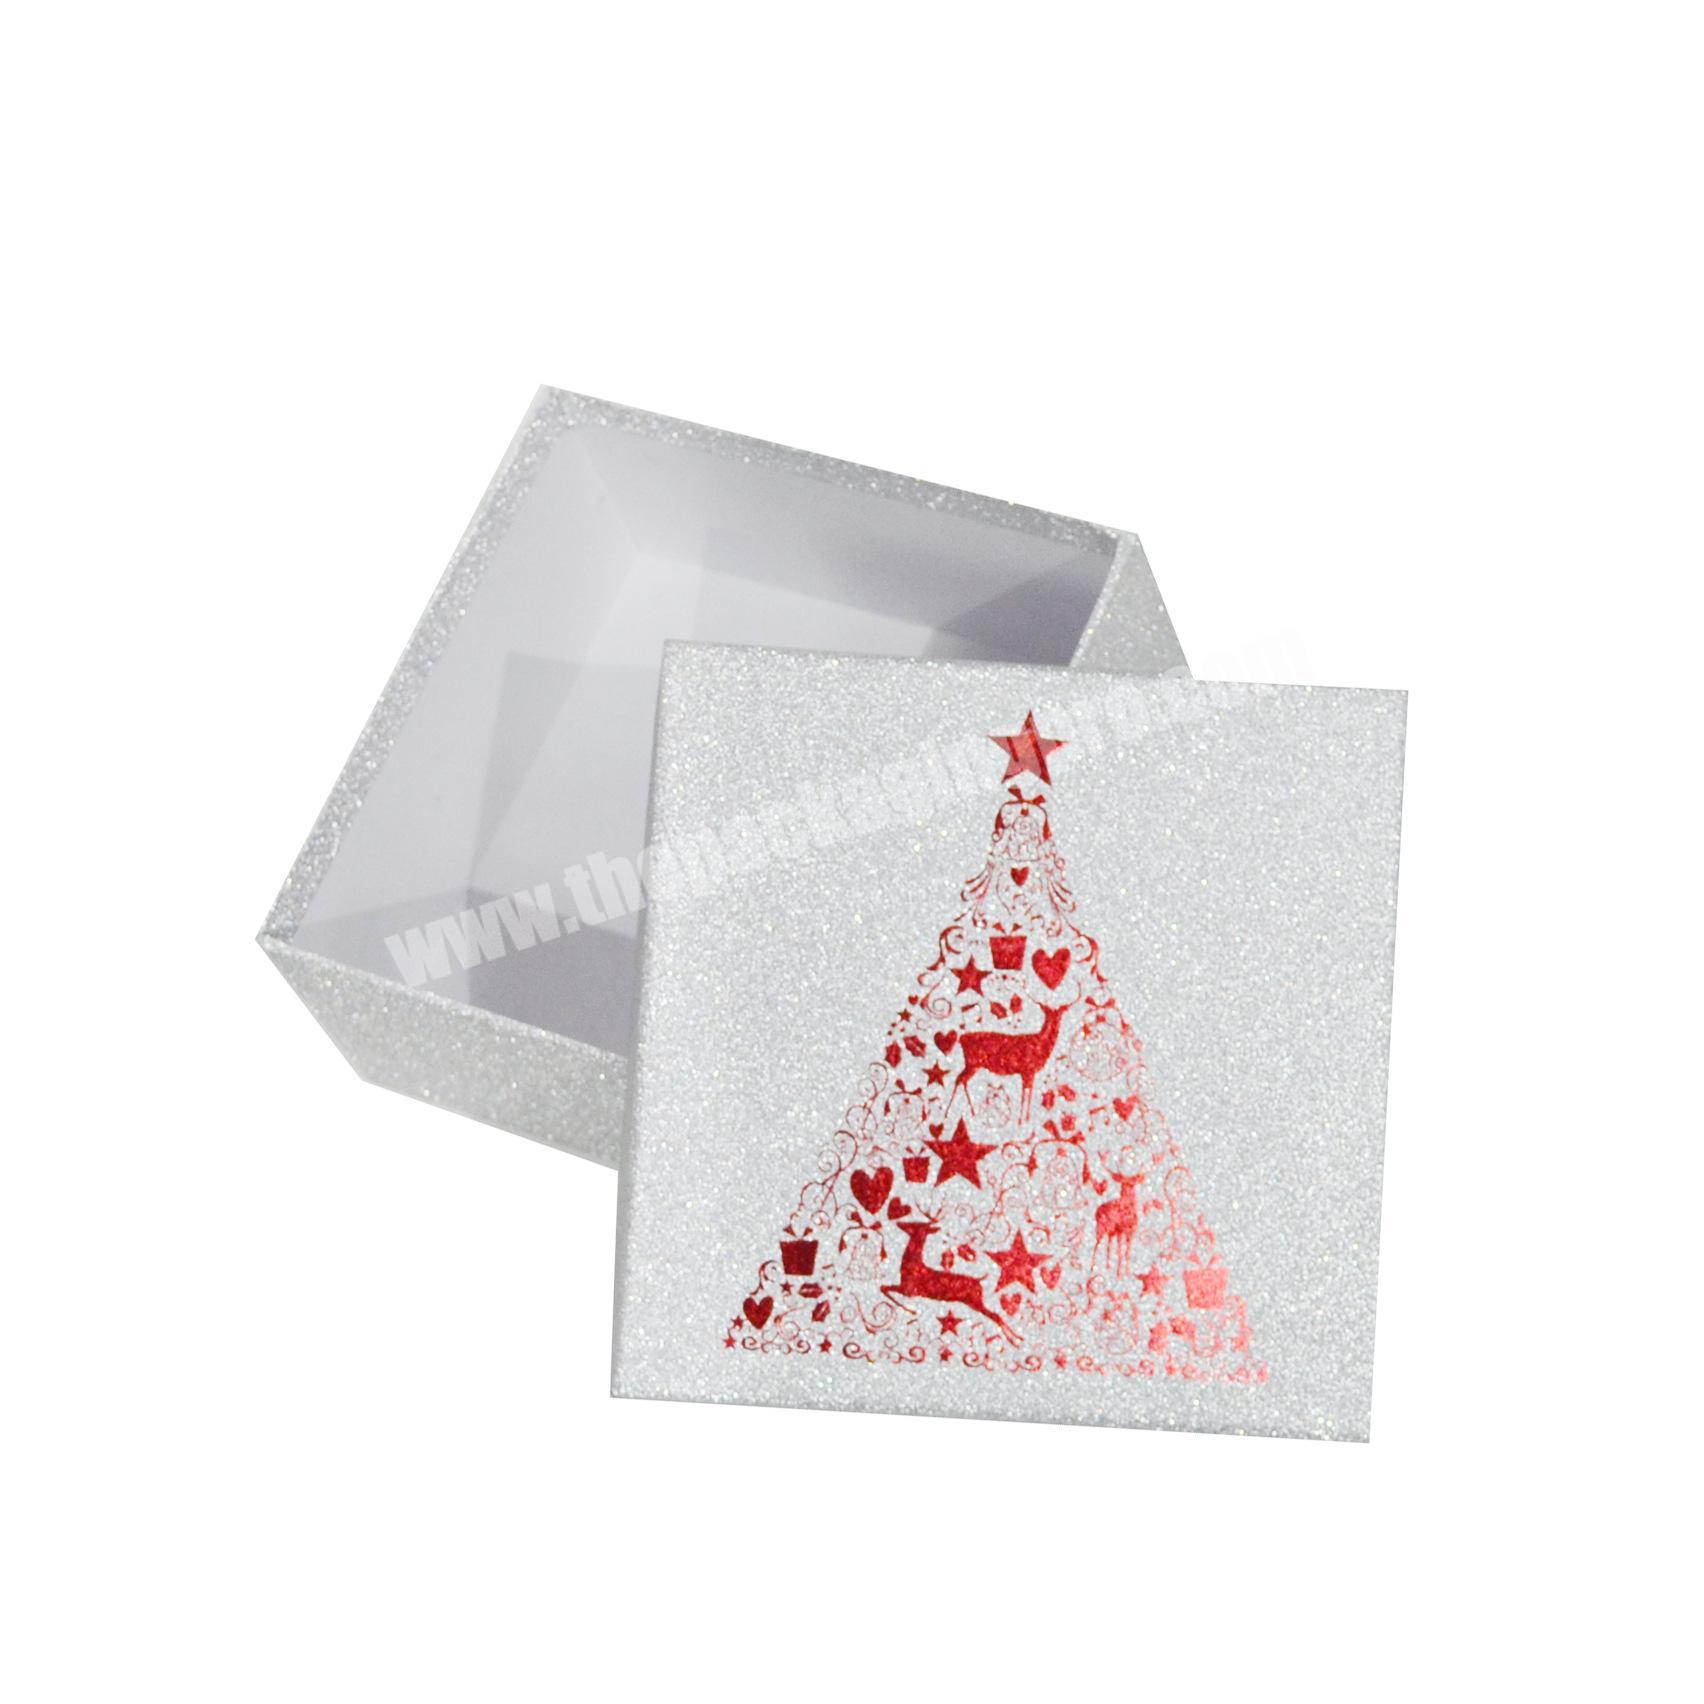 Wholesale Luxury Decorate The Christmas Boxes Custom Carddboard Shiny White Gift Box Packaging